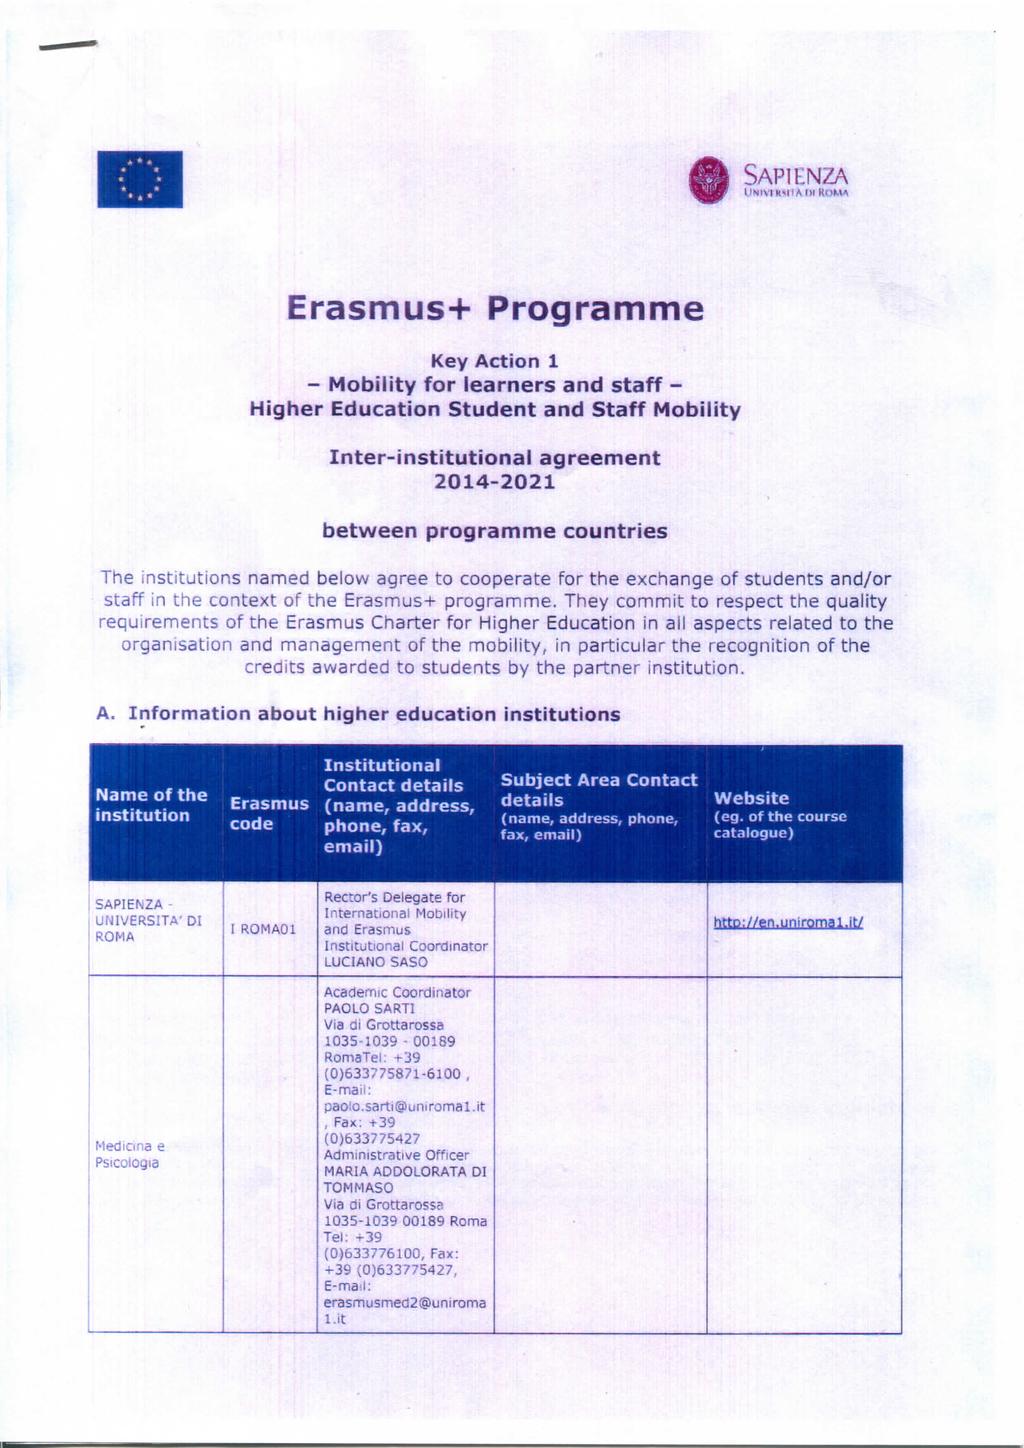 0 SAPIKNZA Erasmus+ Programme Key Action 1 - Mobility for learners and staff - Higher Education Student and Staff Mobility Inter-institutional agreement 2014-2021 between programme countries The